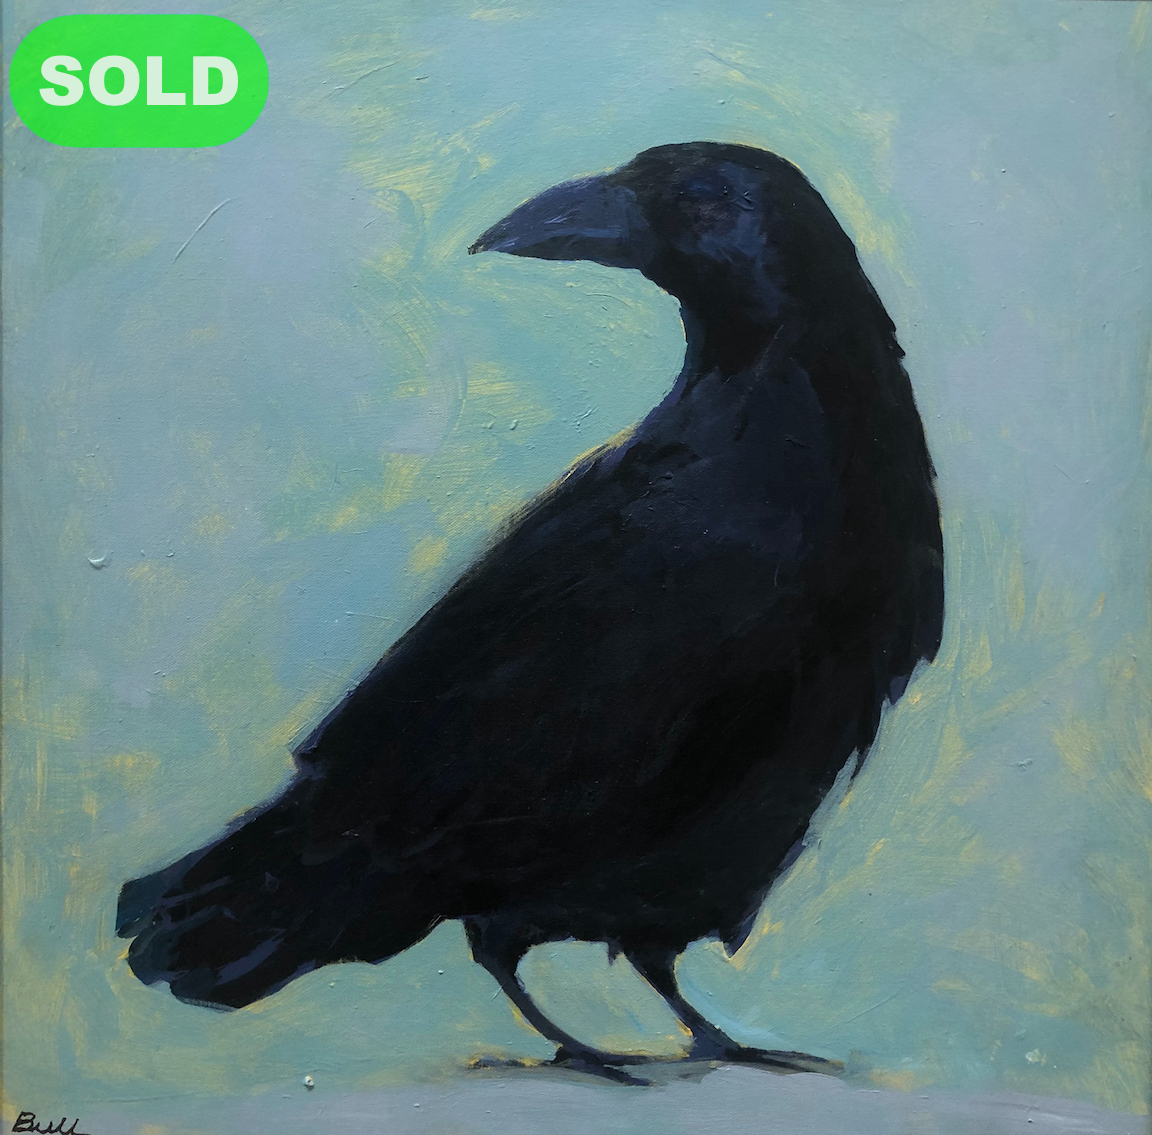 Christopher Bull: Crow (blue background) - SOLD